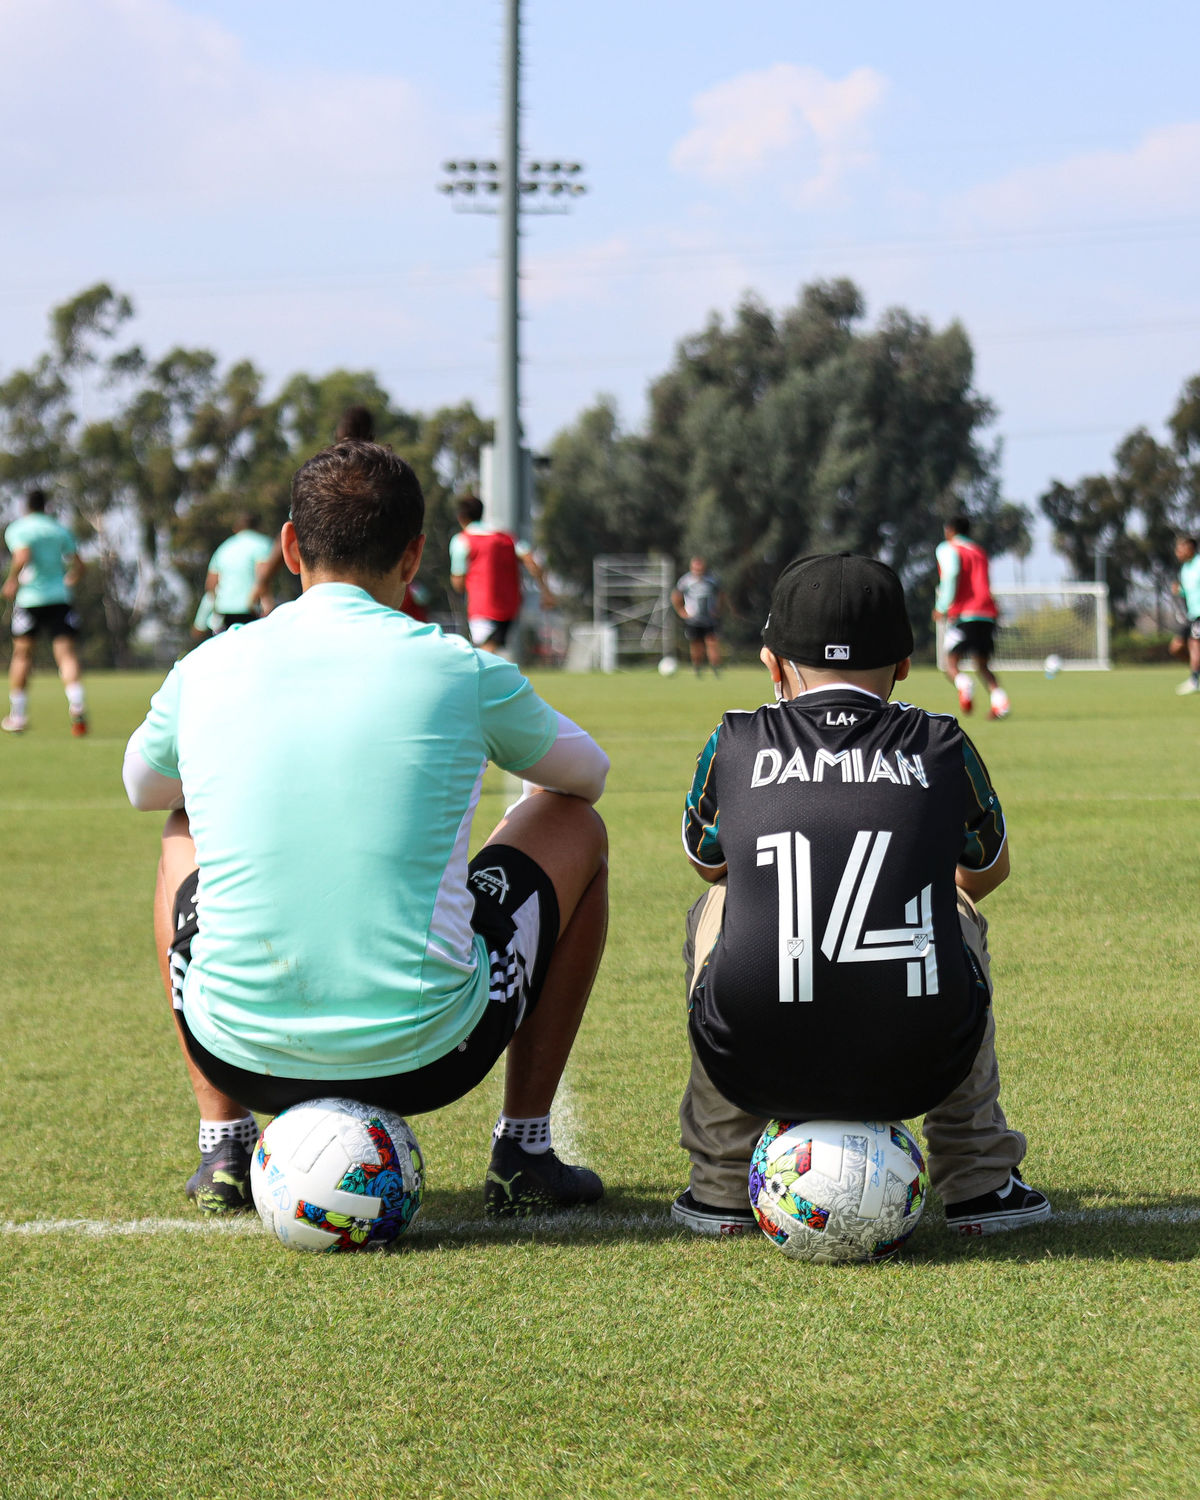 Javier 'Chicharito' Hernandez and Damian watch training at Dignity Health Sports Park.